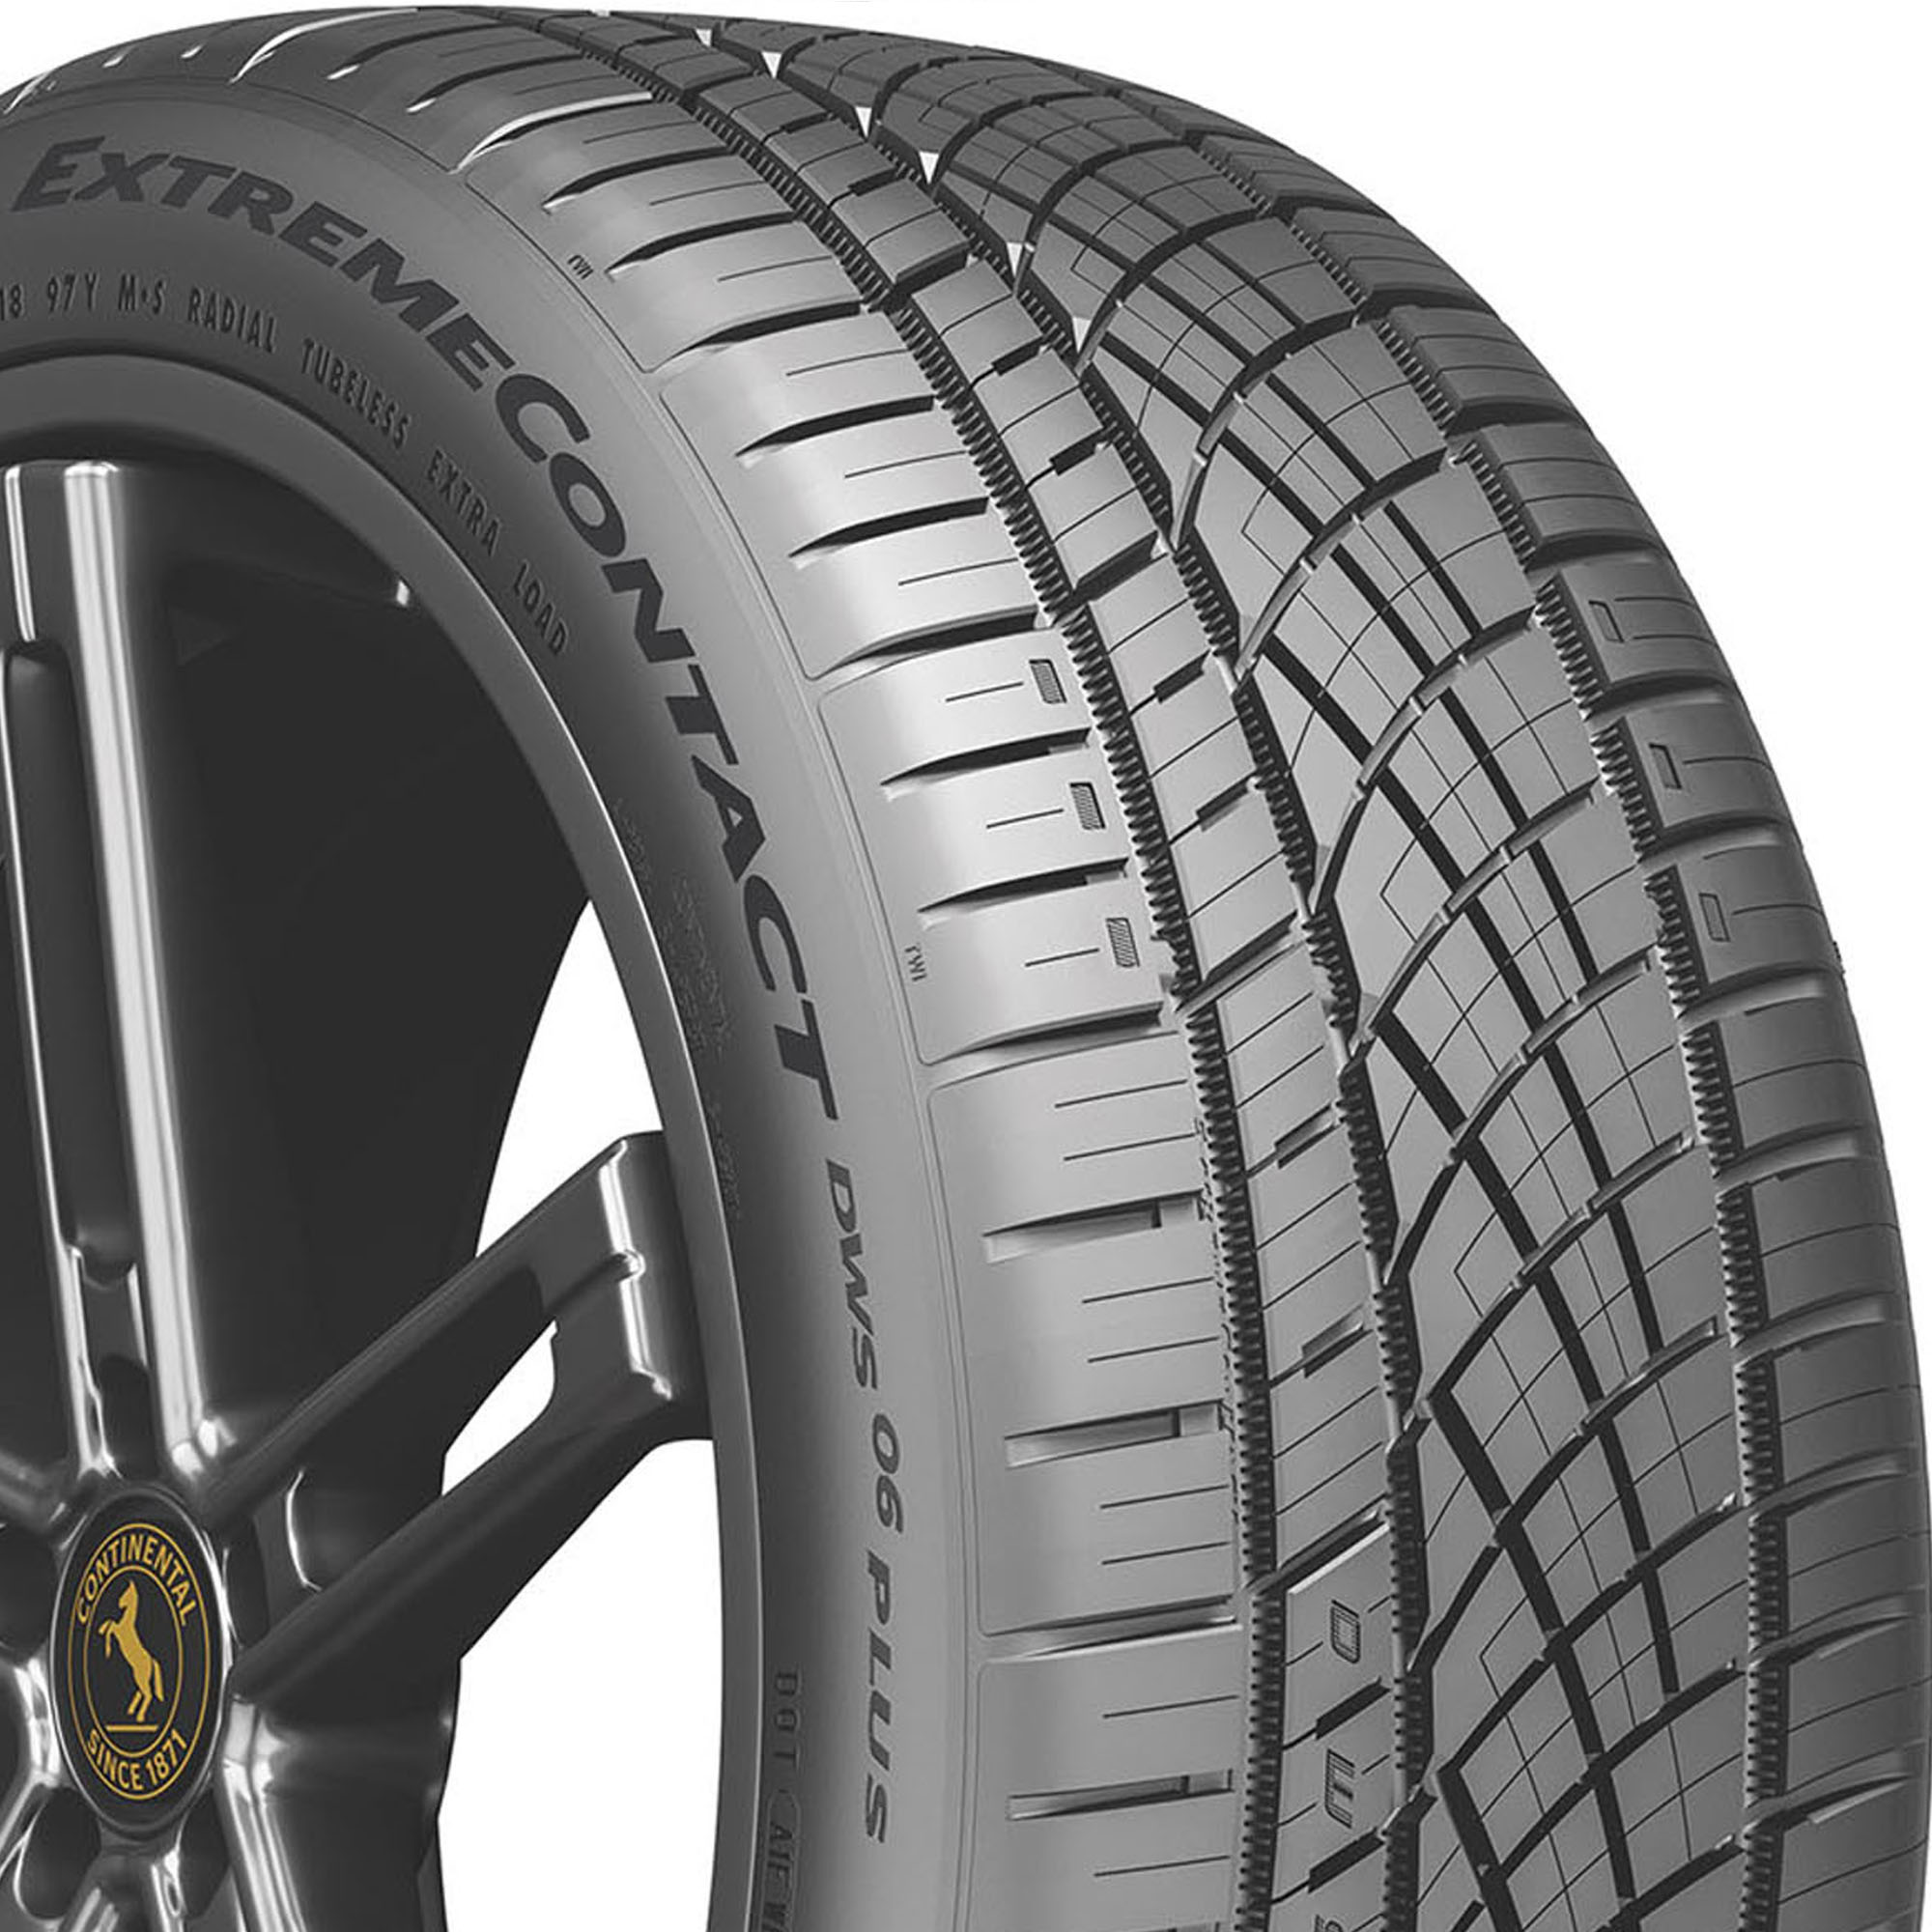 Continental ExtremeContact DWS06 PLUS All Season 315/35ZR20 110Y XL  Passenger Tire